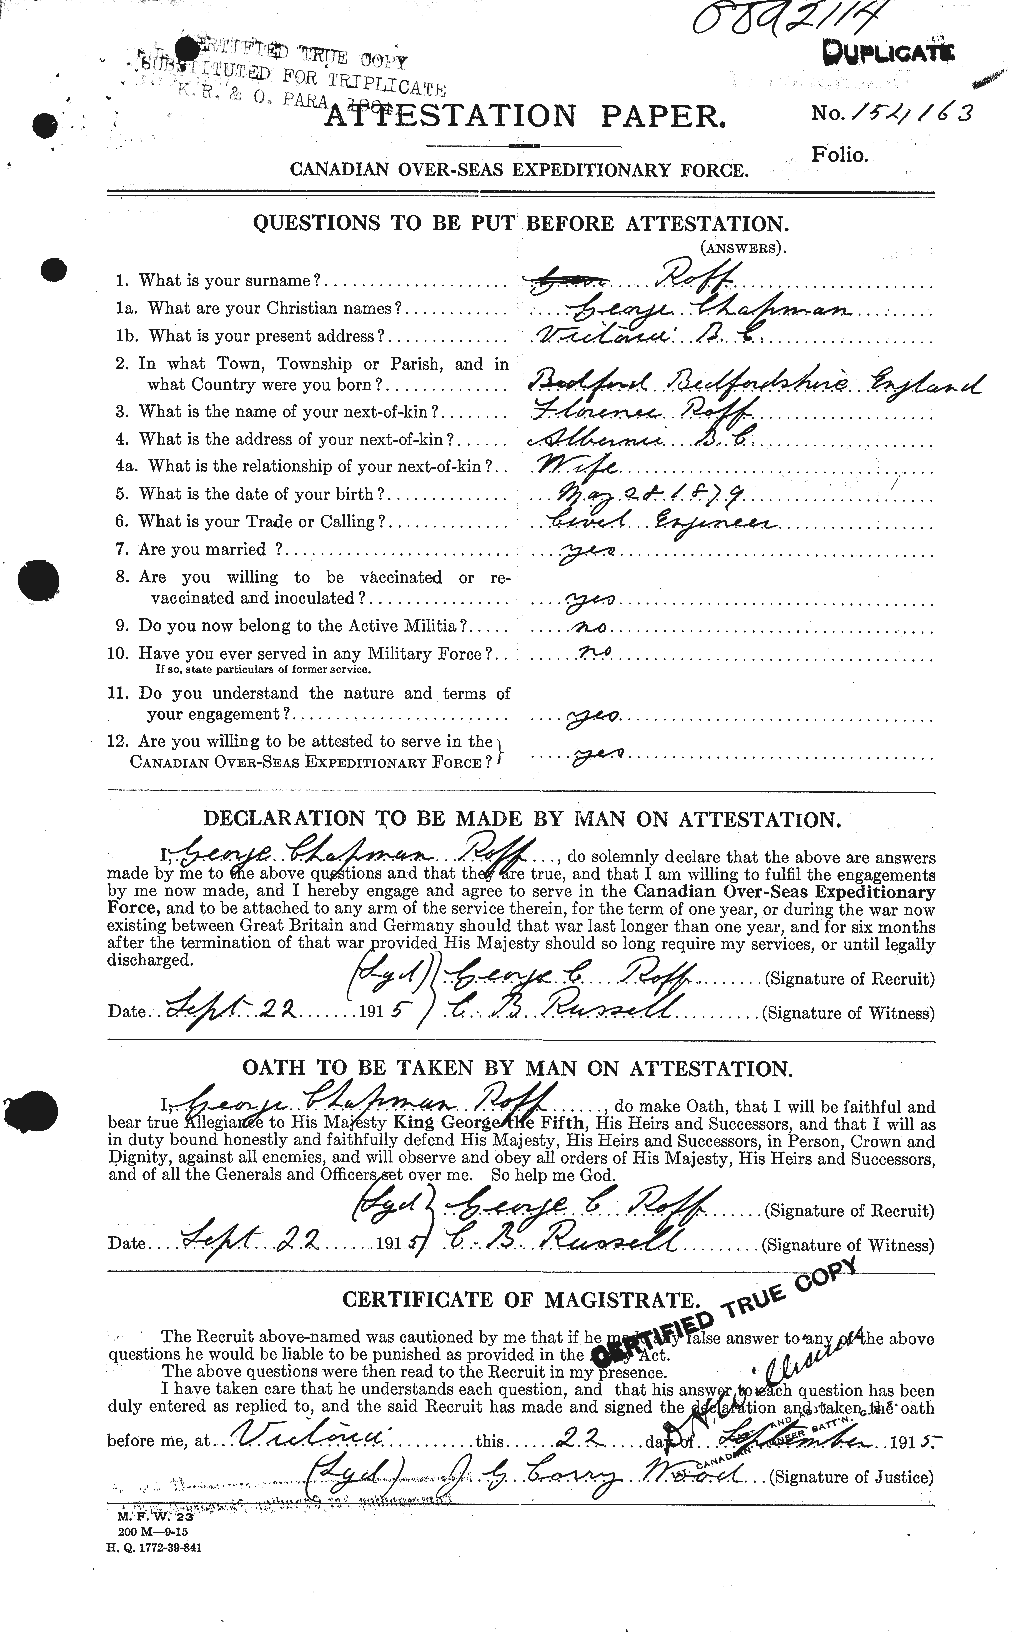 Personnel Records of the First World War - CEF 609524a